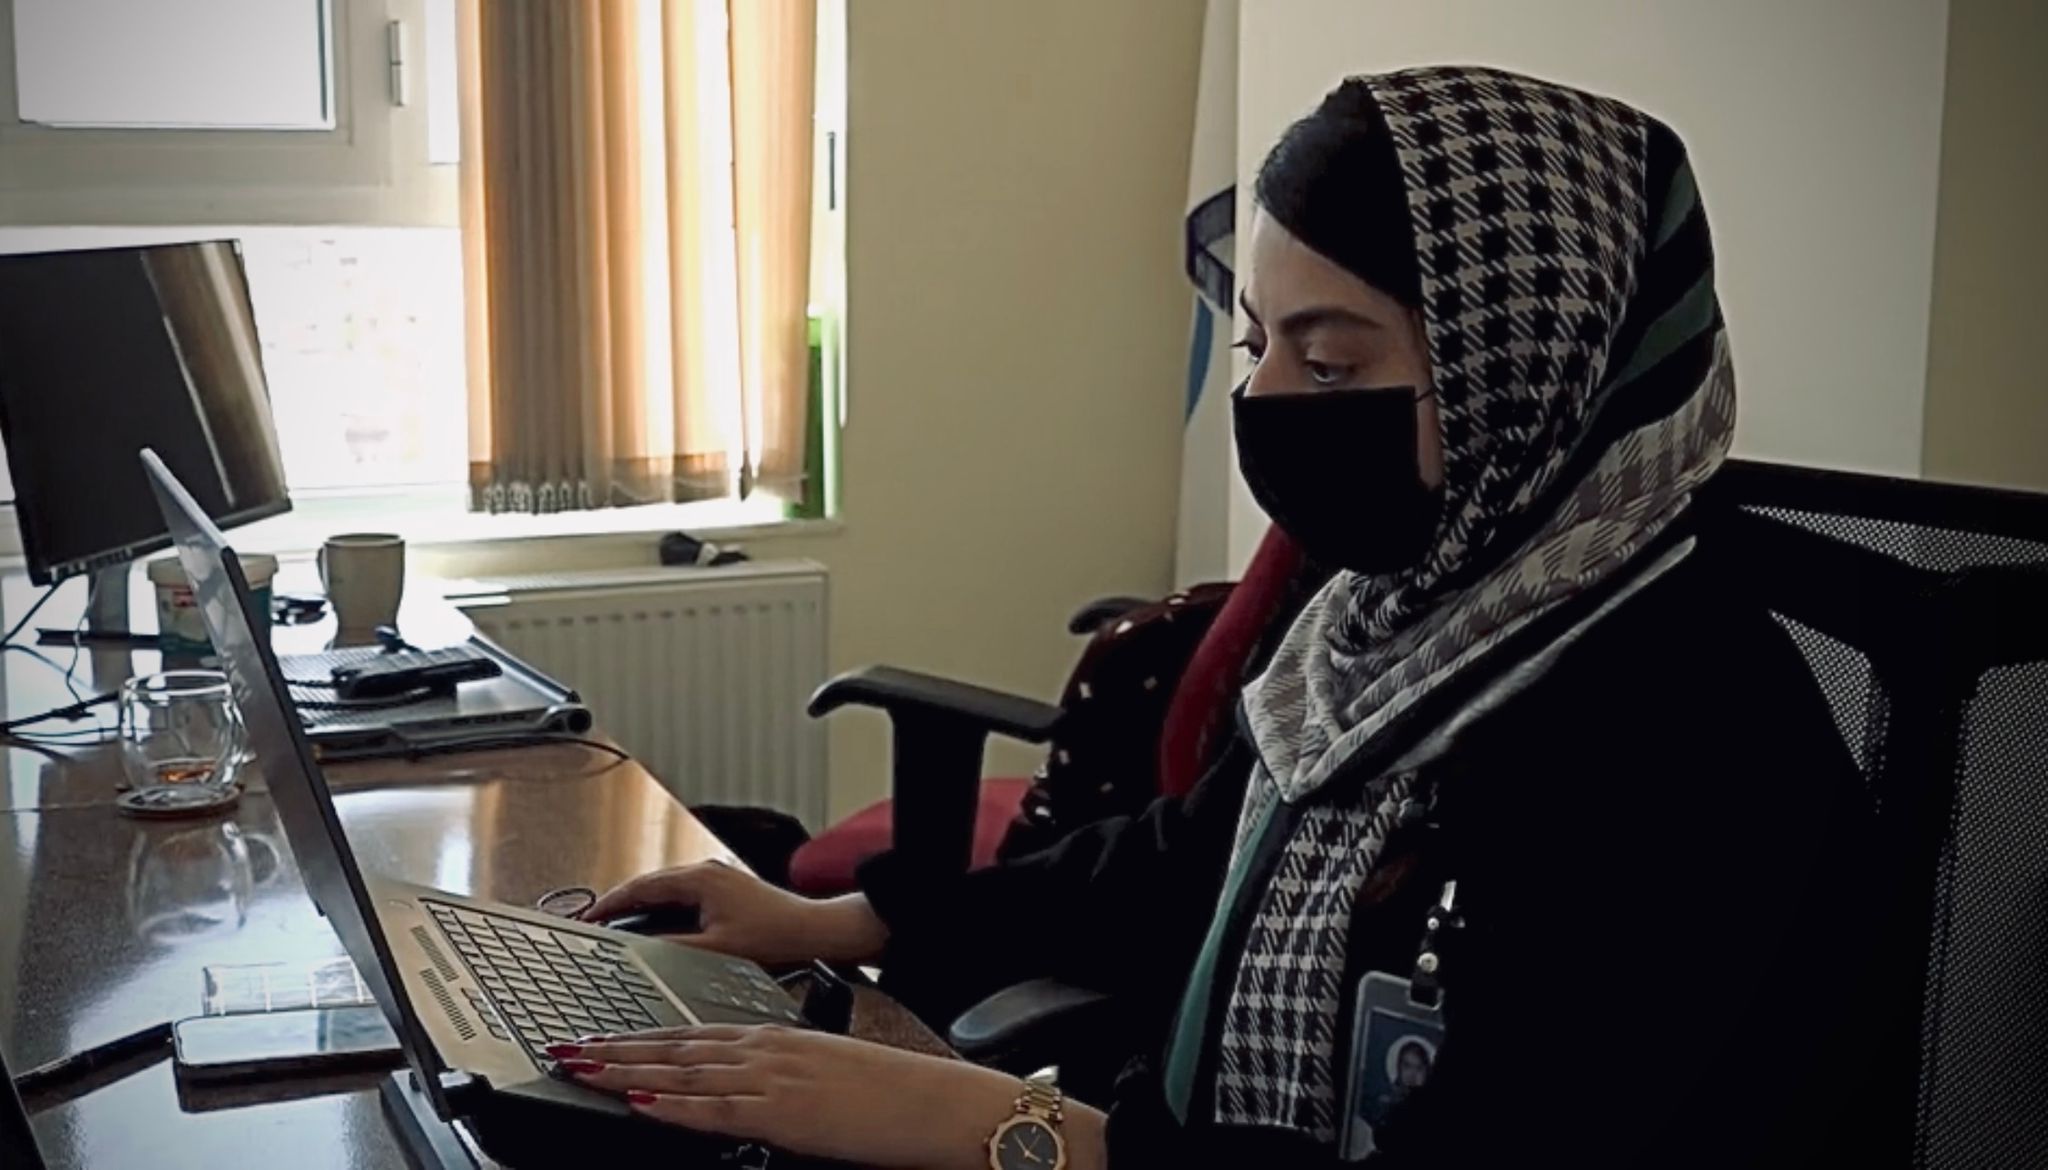 Afghan women and girls join online study programs despite Taliban’s ban on female education